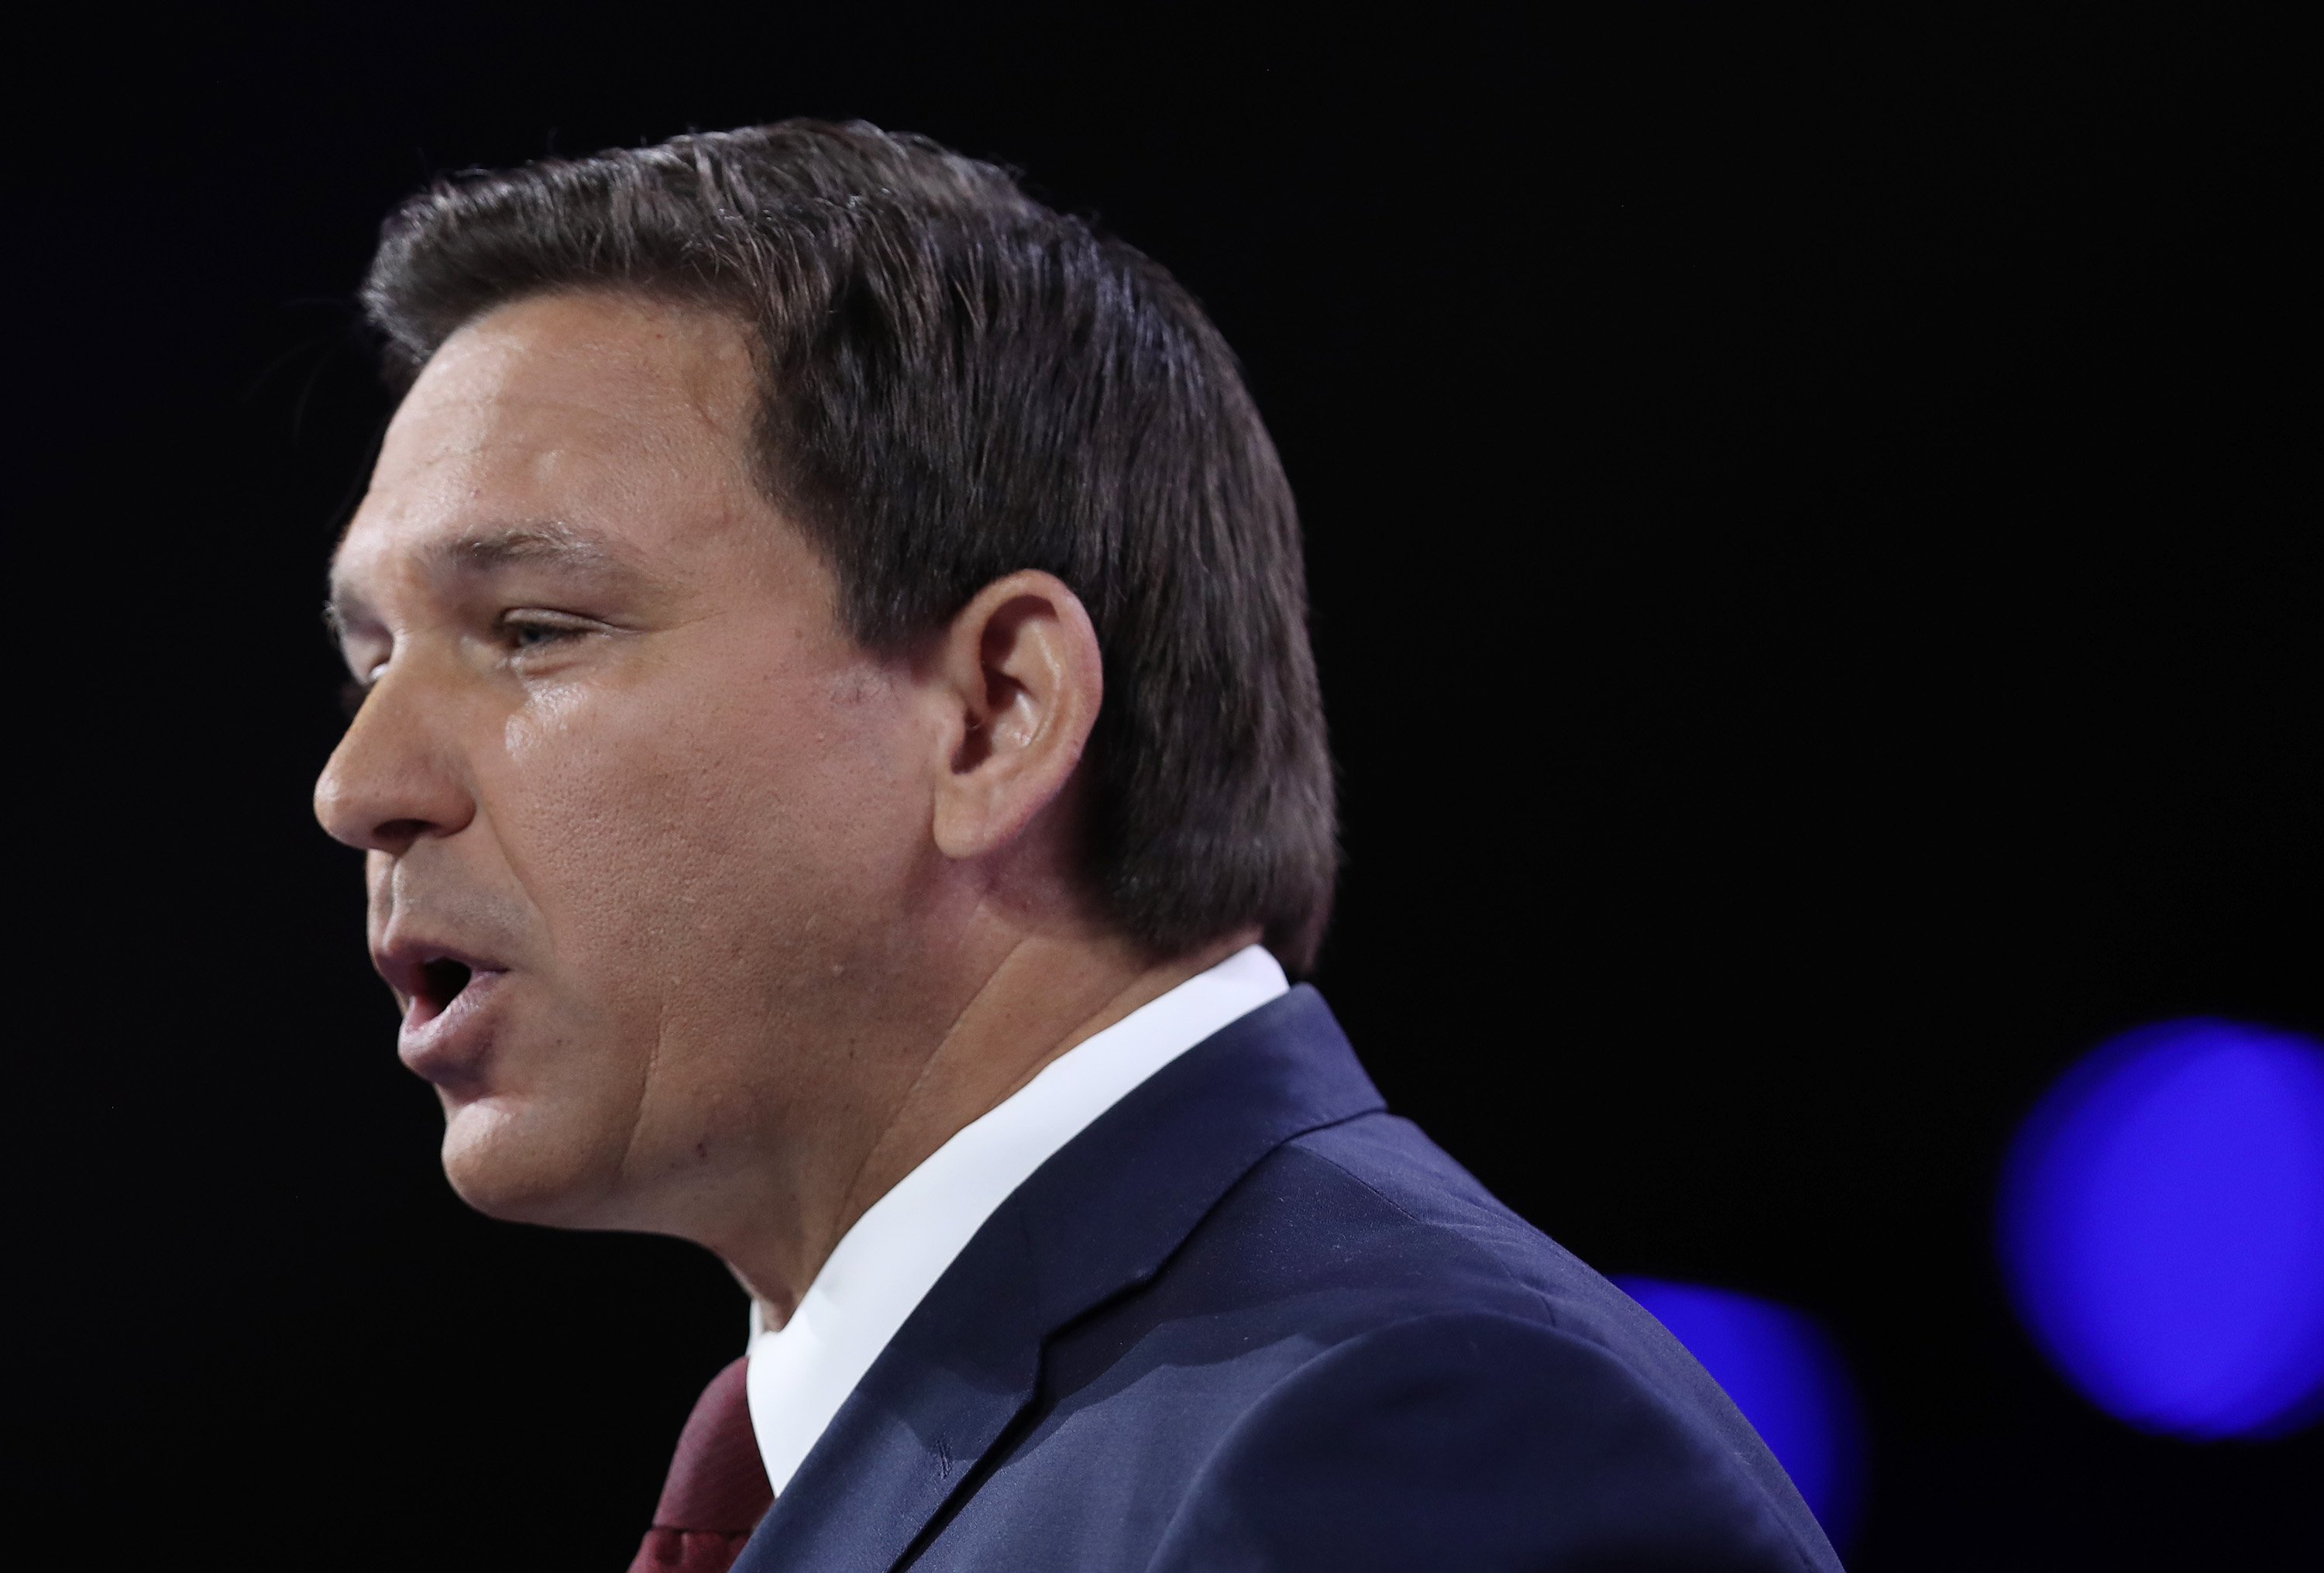 The county runs counter to Florida Governor Ron DeSantis, says state-authorized vaccines for wealthy communities